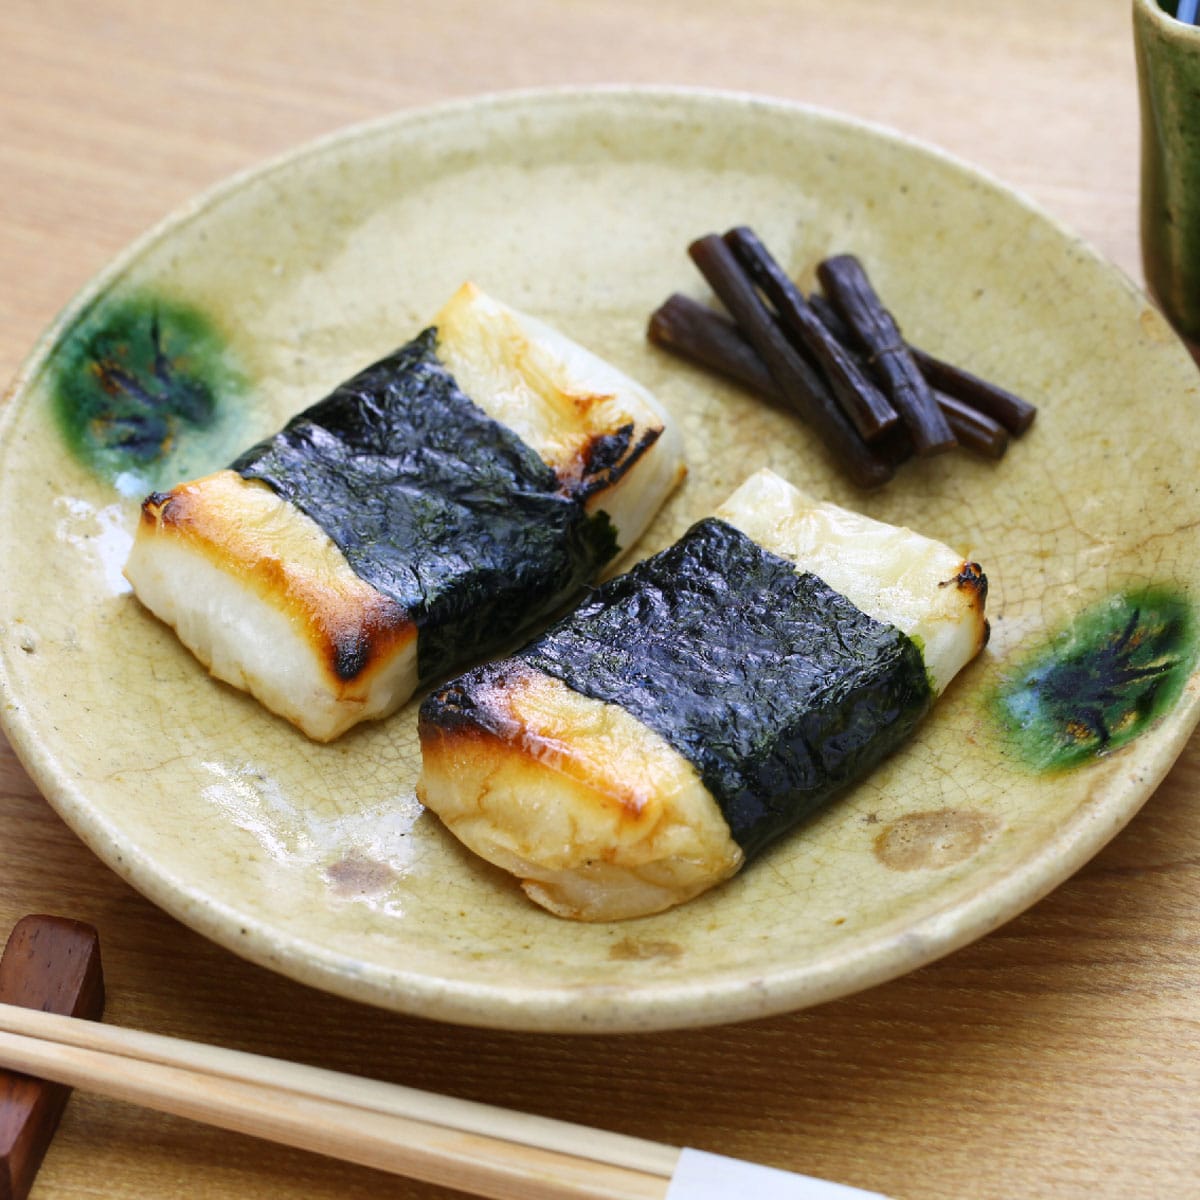 What is Isobeyaki mochi? The outside of this type of mochi is coated with soy sauce and sugar and wrapped with nori seaweed.